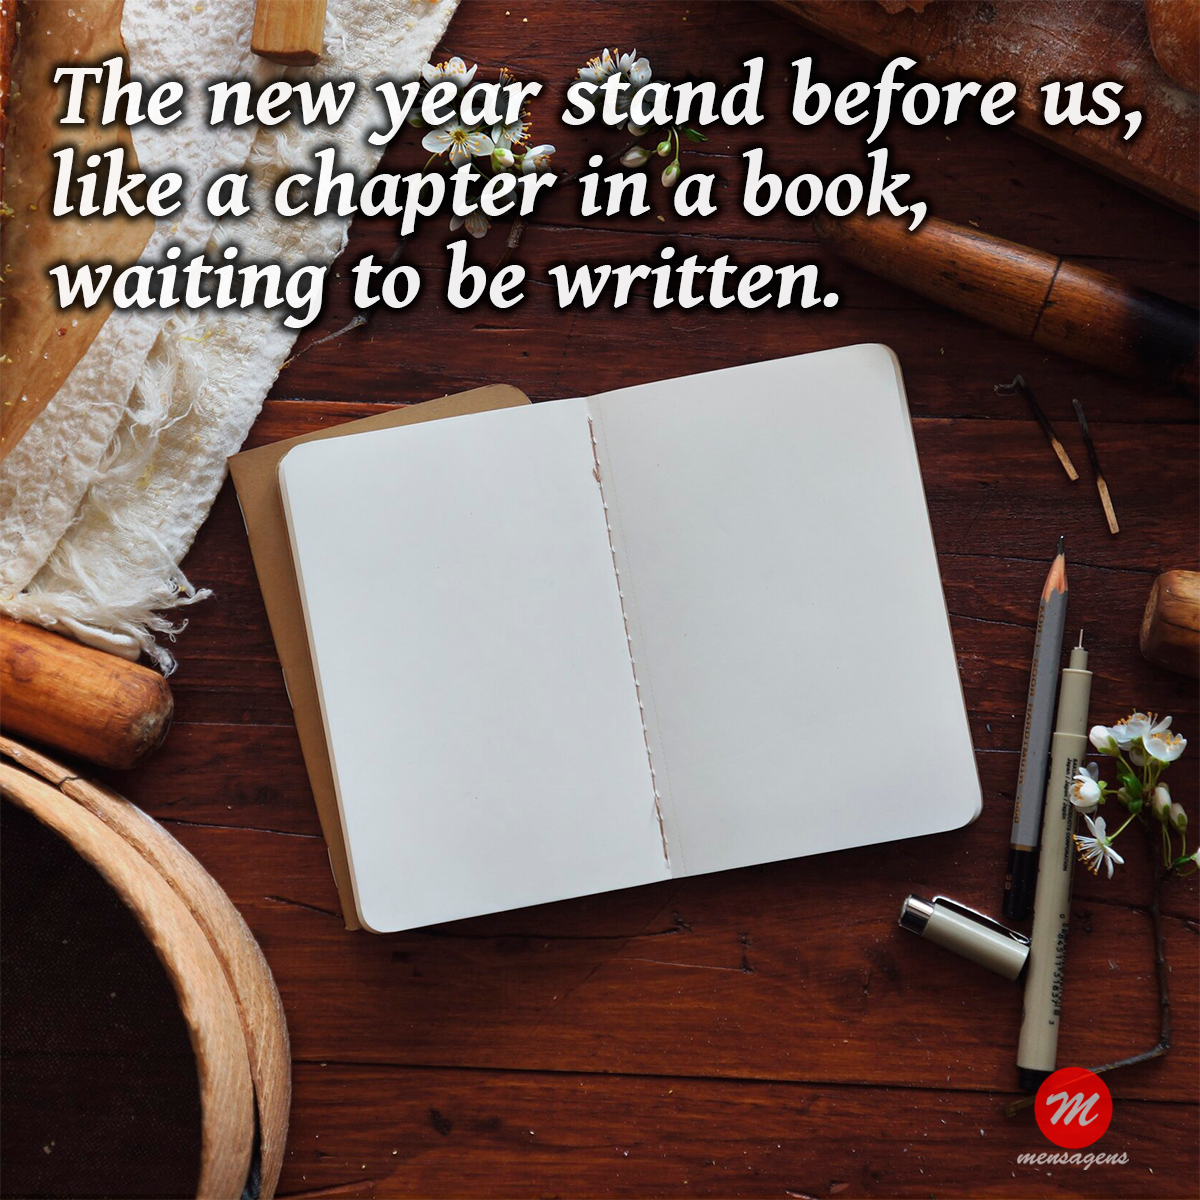 new year quotes inspirational - The new year stand before us, like a chapter in a book, waiting to be written